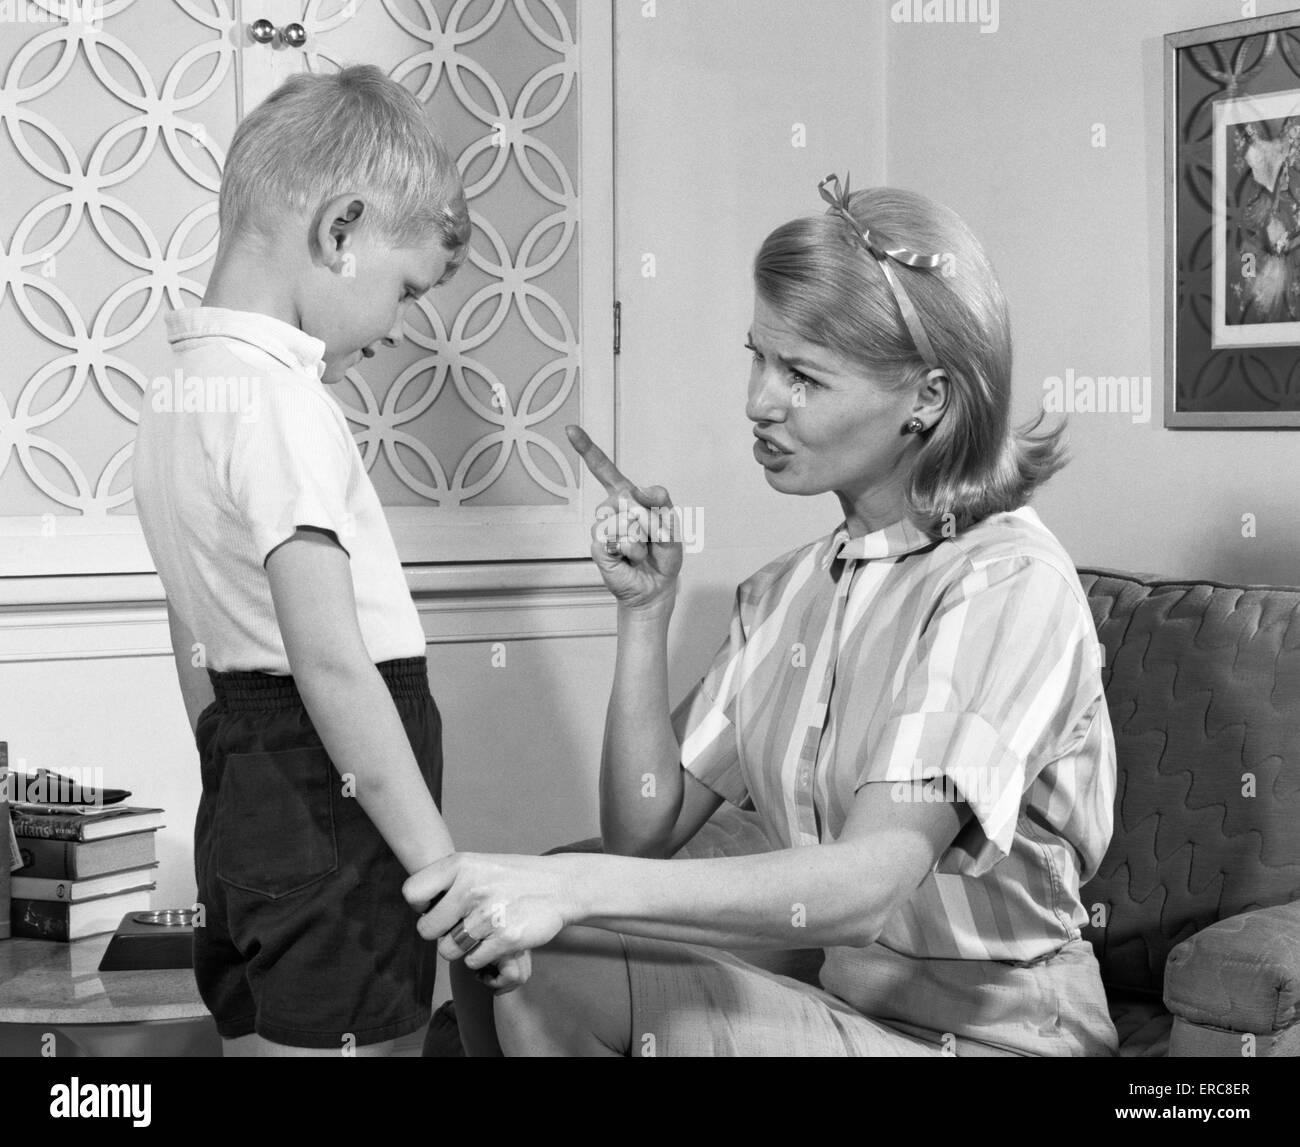 1970s MOTHER DISCIPLINING HER SON BY TALKING HARSHLY AND SHAKING HER FINGER BOY HANGING HIS HEAD IN SHAME Stock Photo